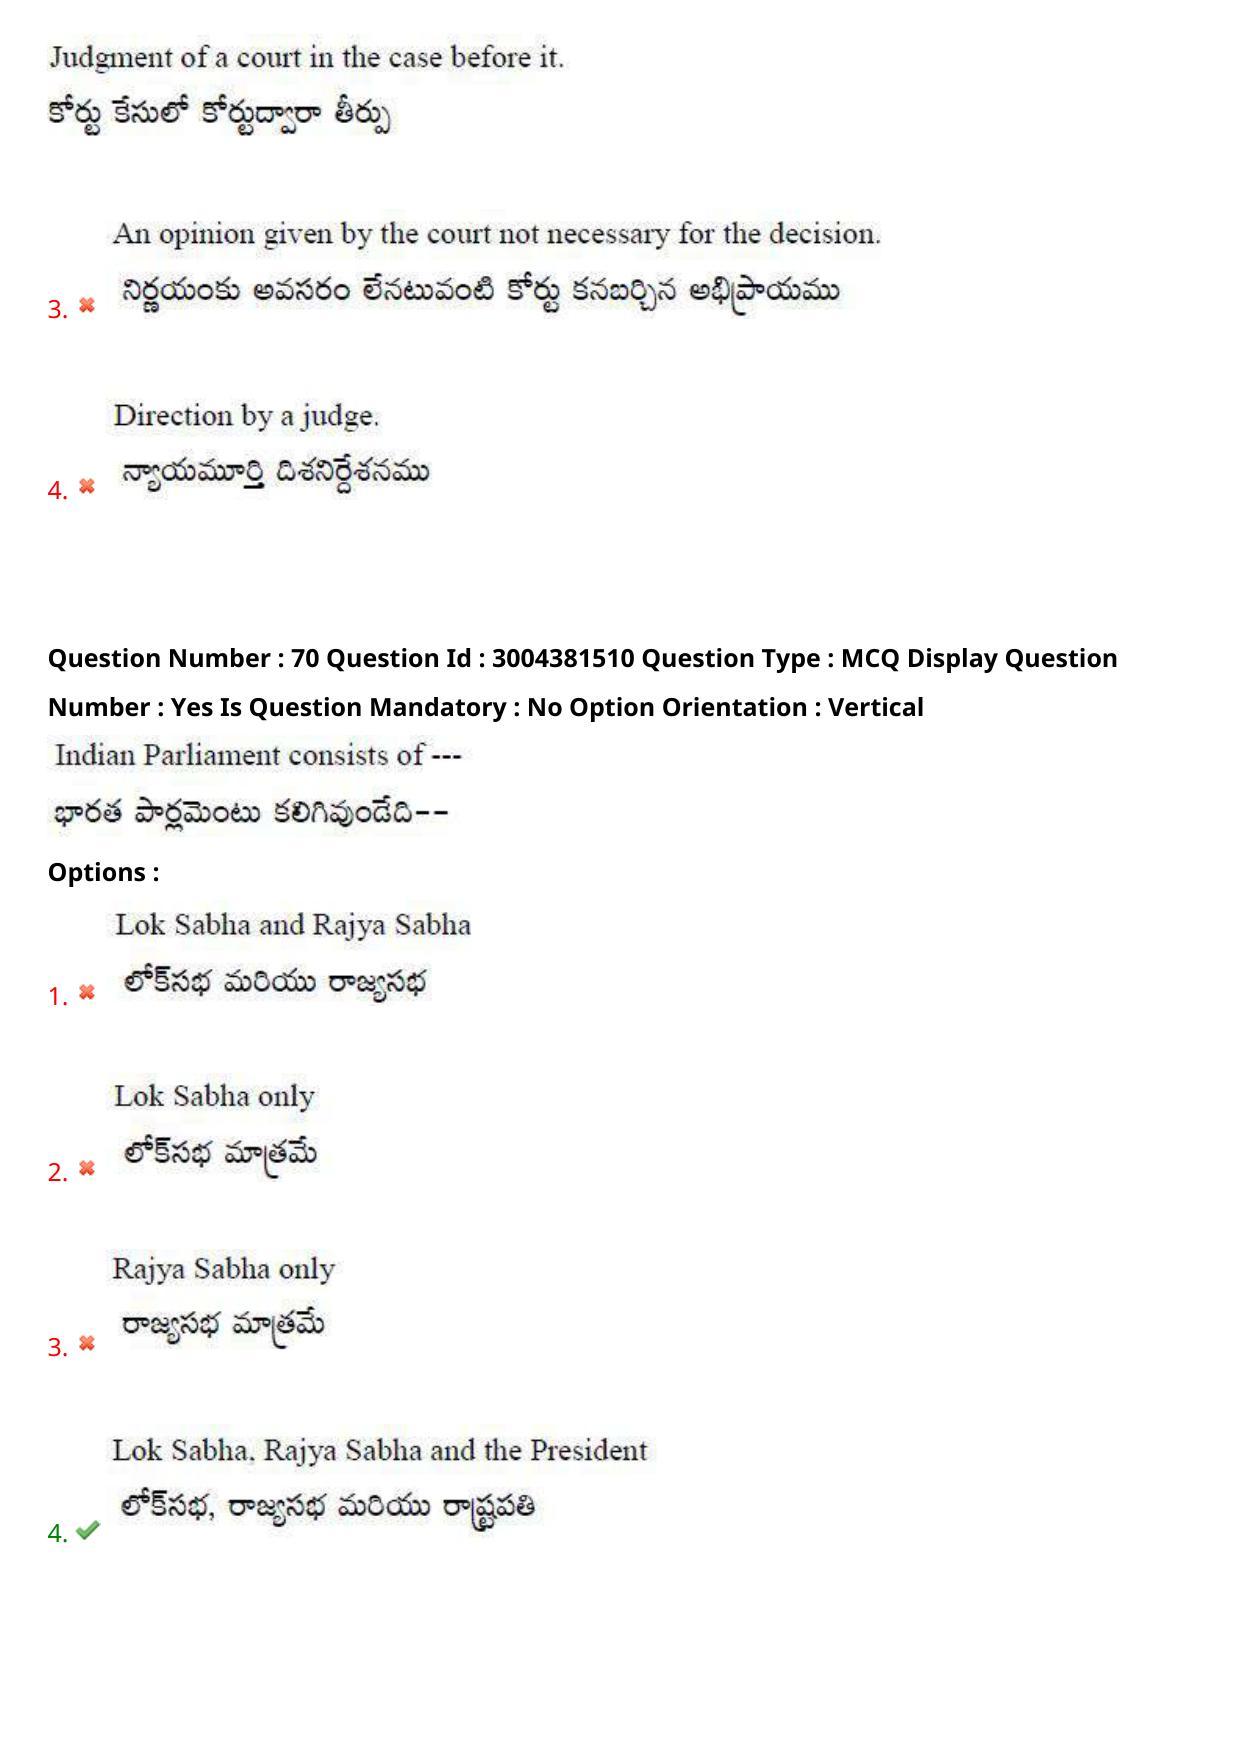 AP LAWCET 2020 - 3 Year LLB Question Paper With Keys - Page 46